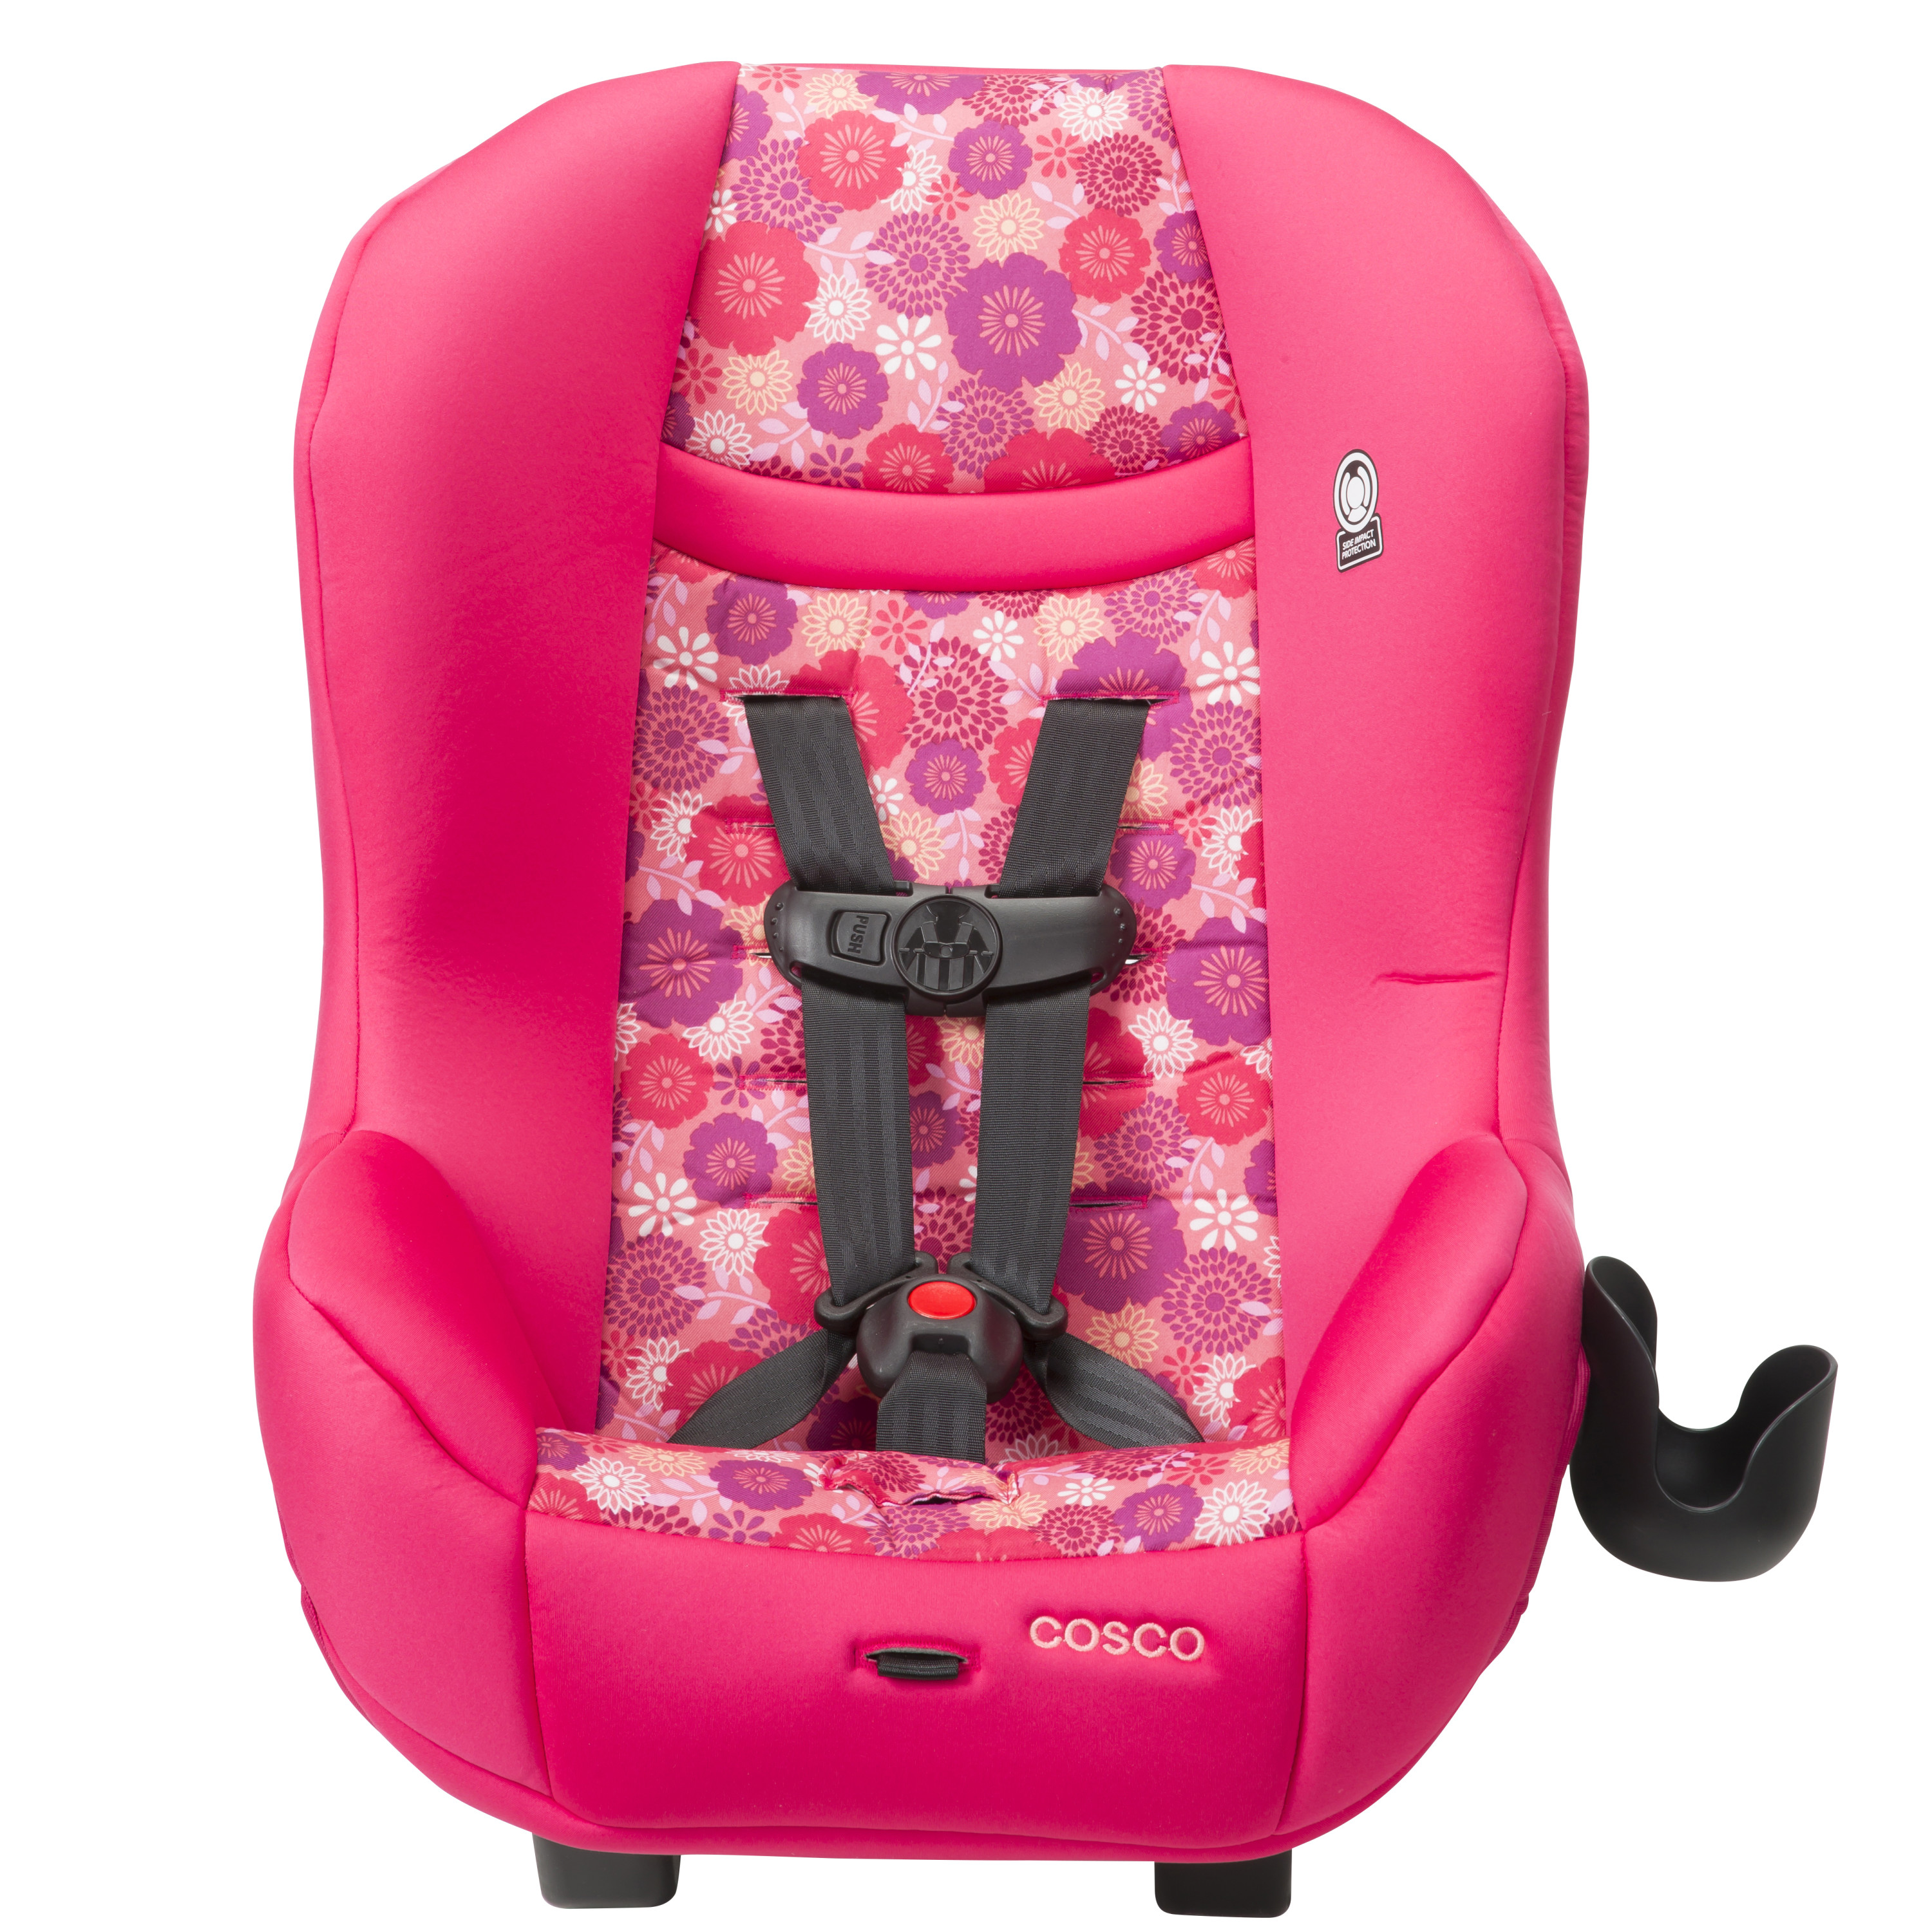 Cosco Scenera Convertible Car Seat, Floral Orchard Blossom Pink - image 4 of 13